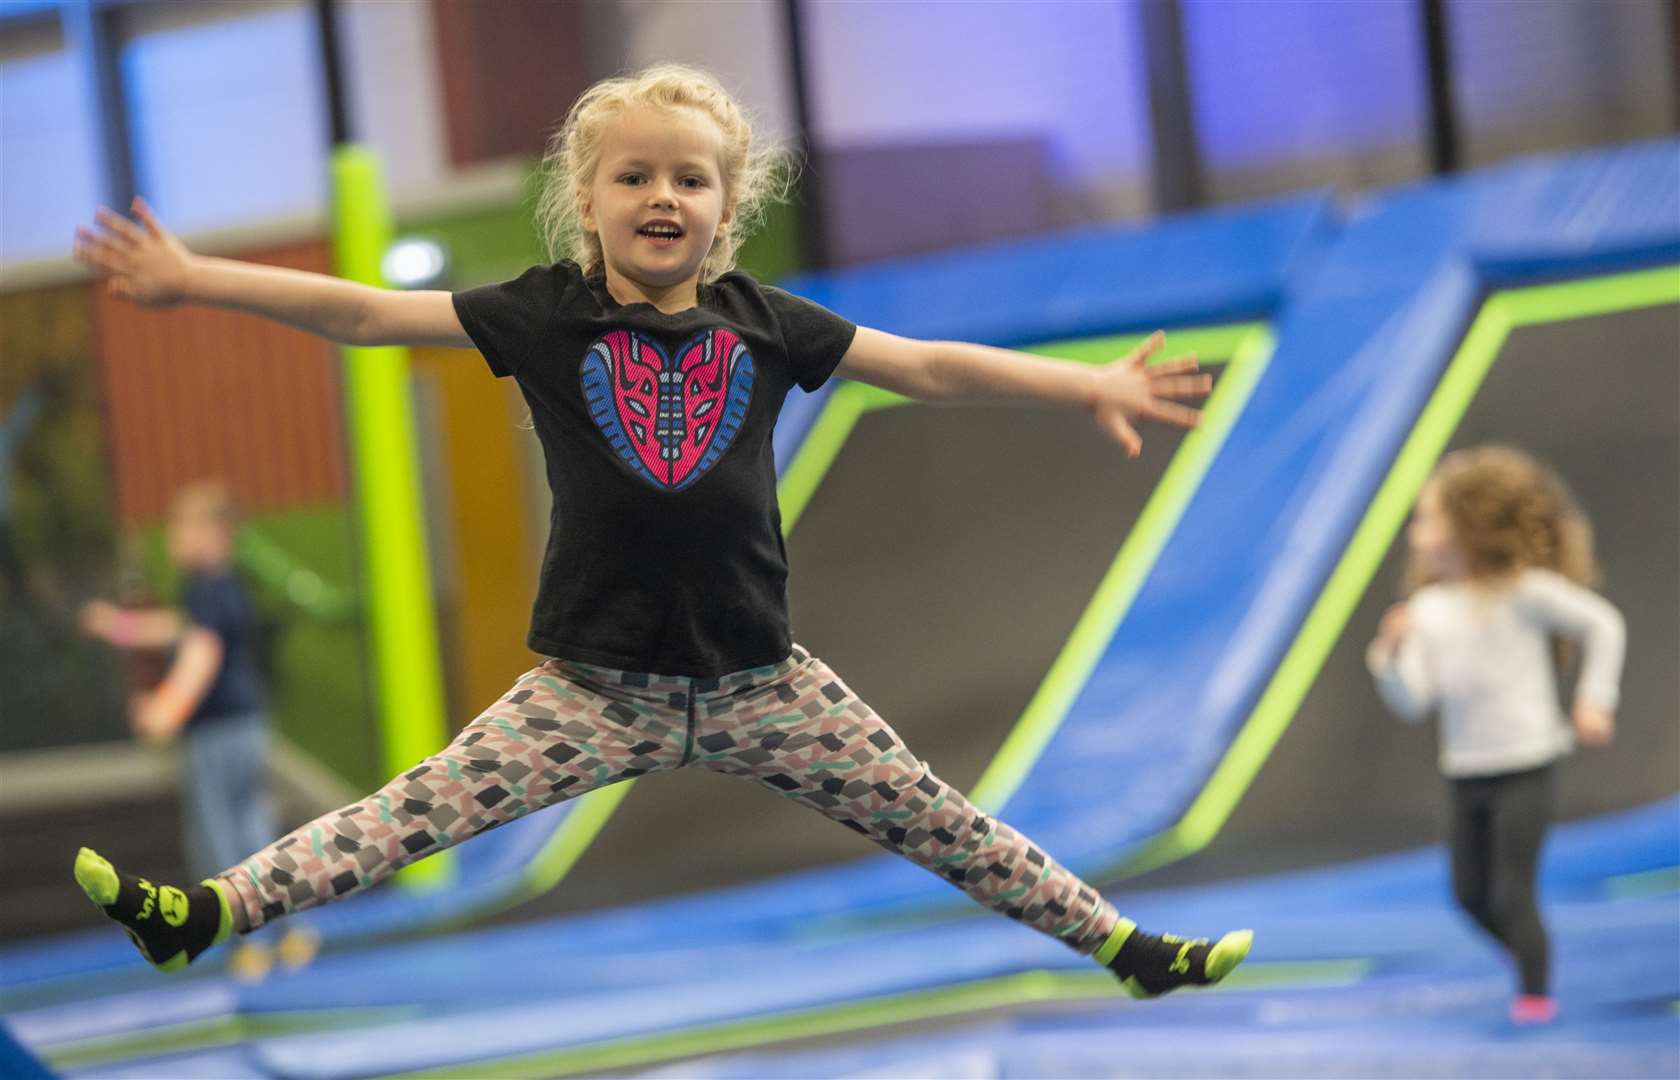 Jump In trampoline park at Tonbridge is holding a Jumpathon for Sport Relief